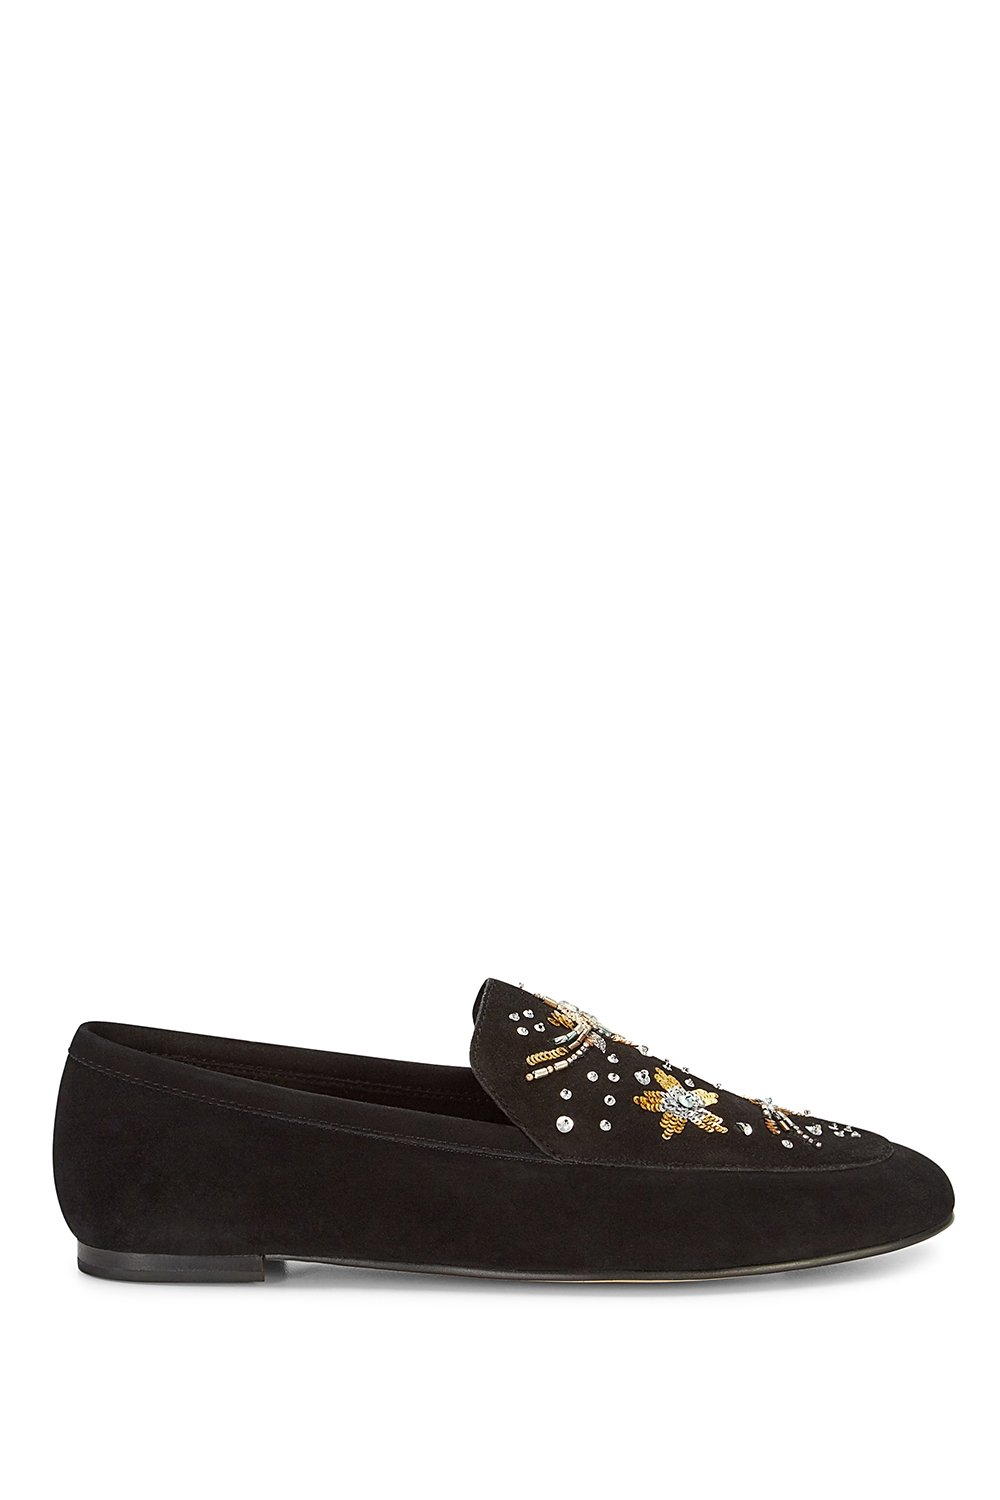 Raine Embroidery Loafer